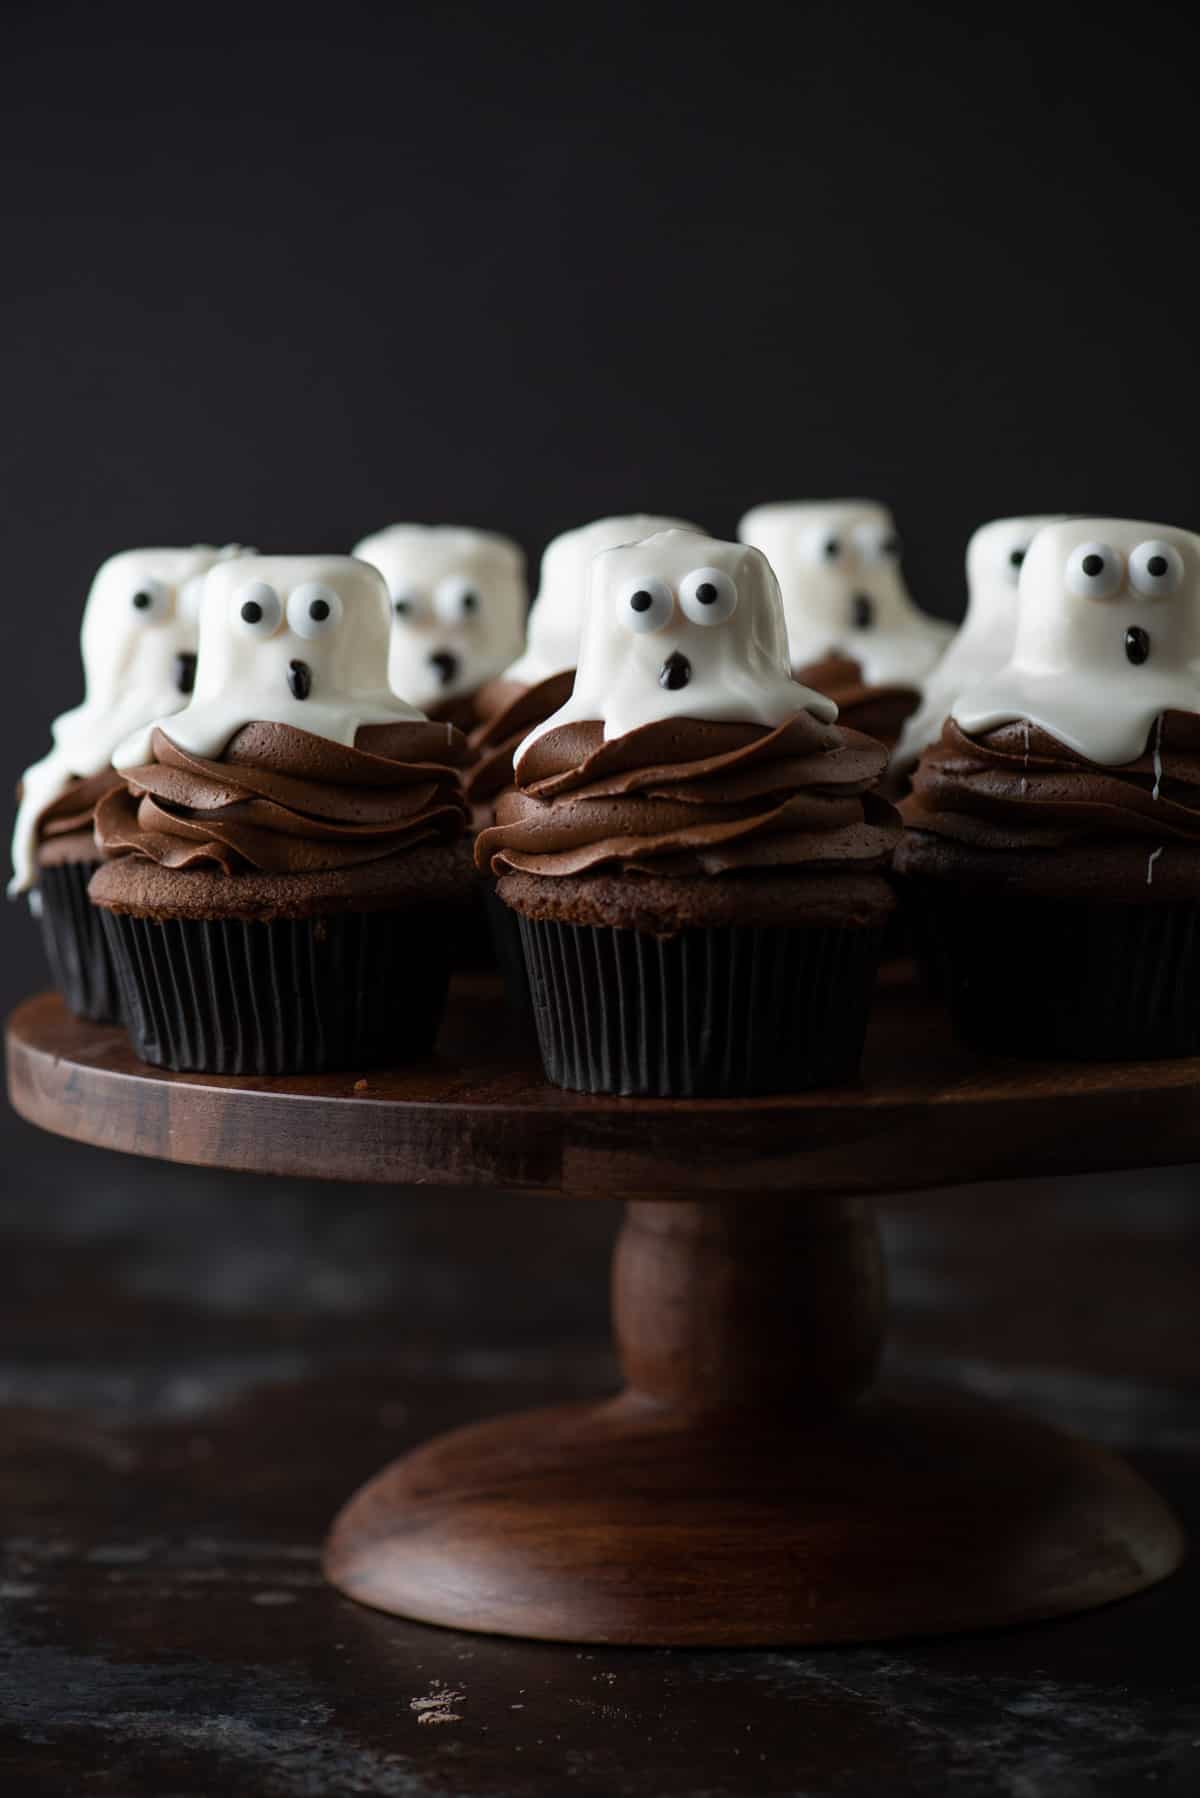 ghost cupcakes arranged on wooden cake stand on dark background